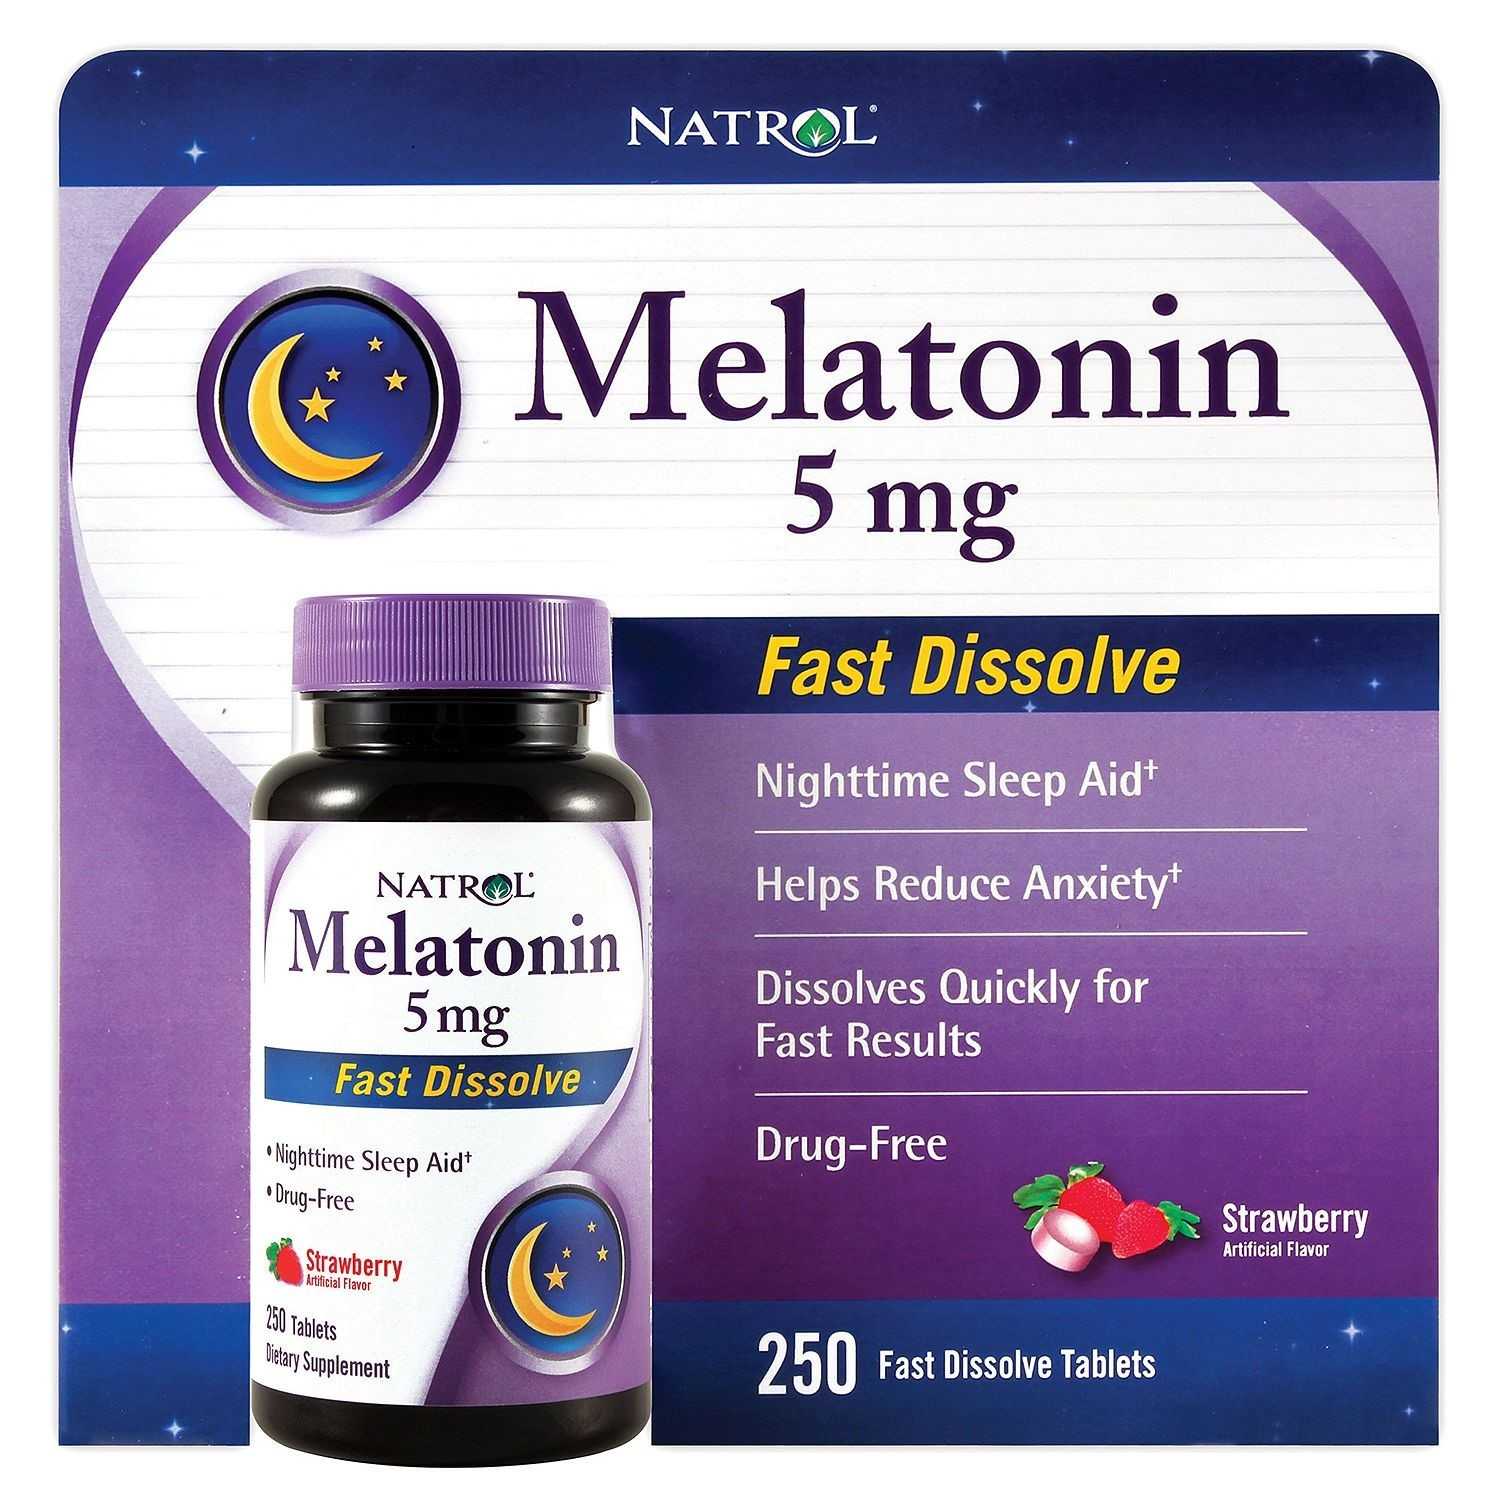 Can You Take Melatonin While Breastfeeding? (RISKY FOR BABY?)